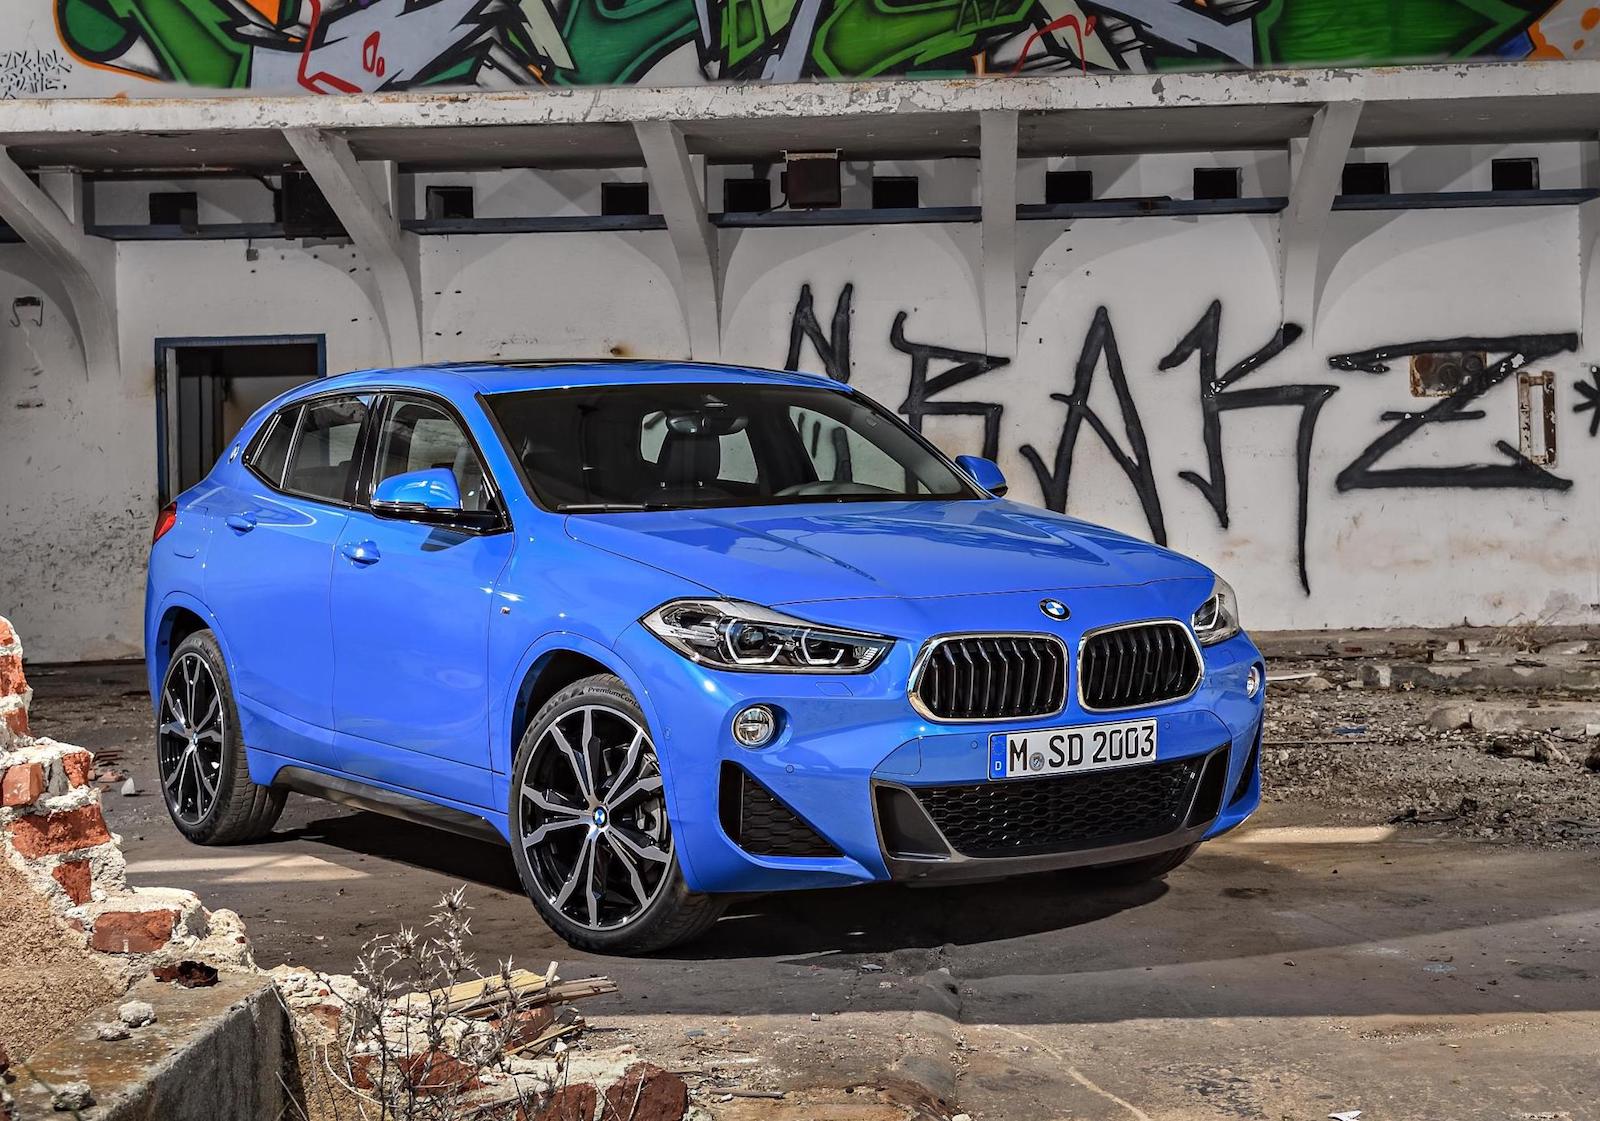 BMW X2 on sale in Australia in March from $55,900